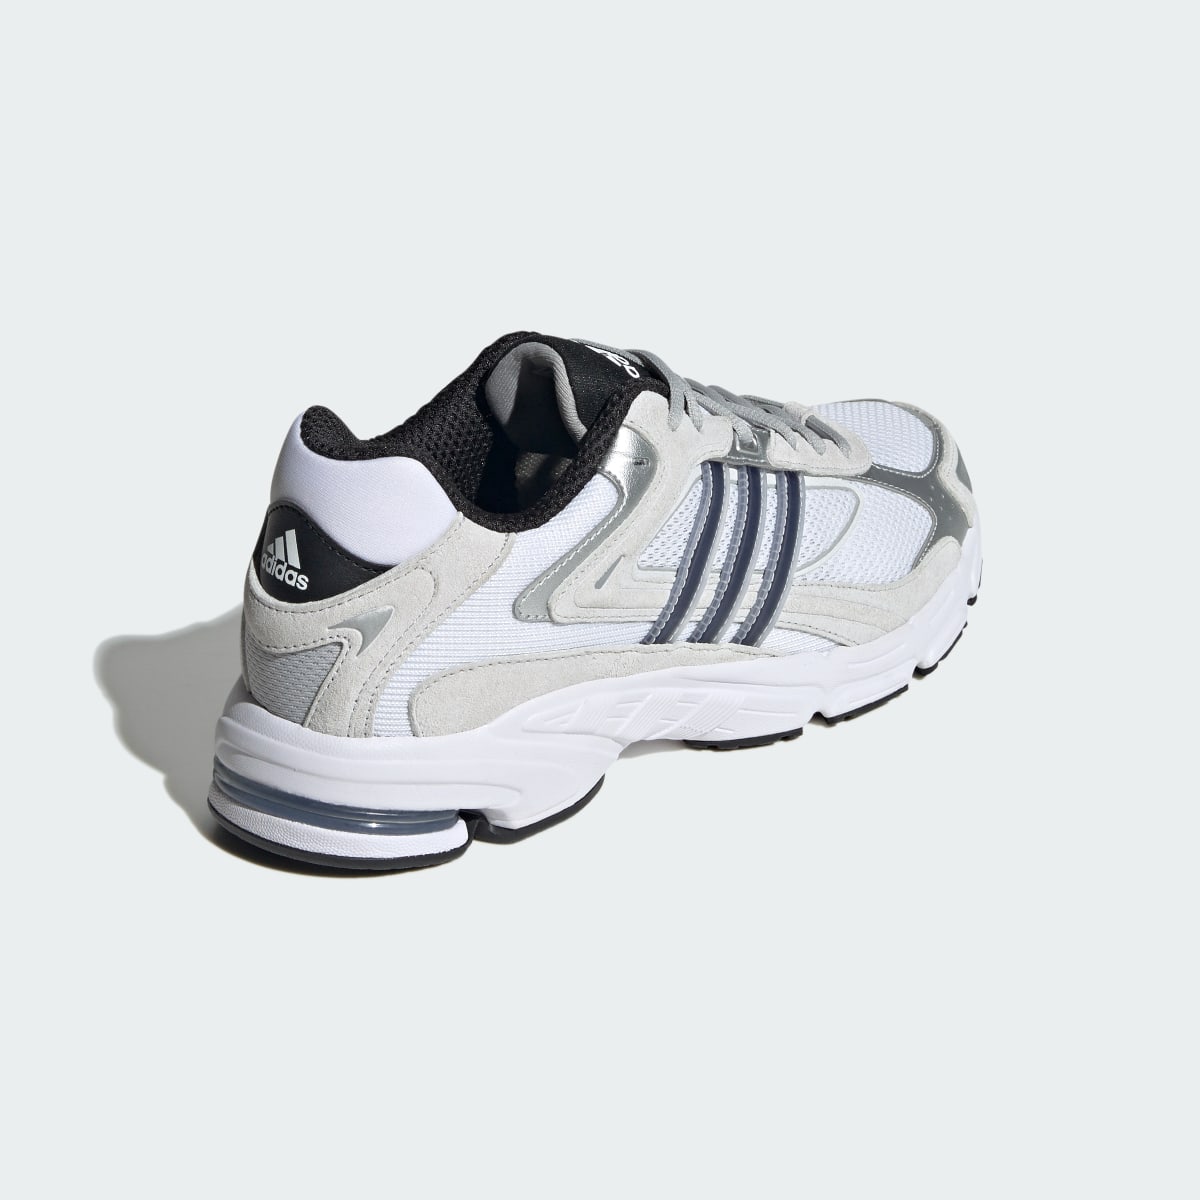 Adidas Response CL Shoes. 6